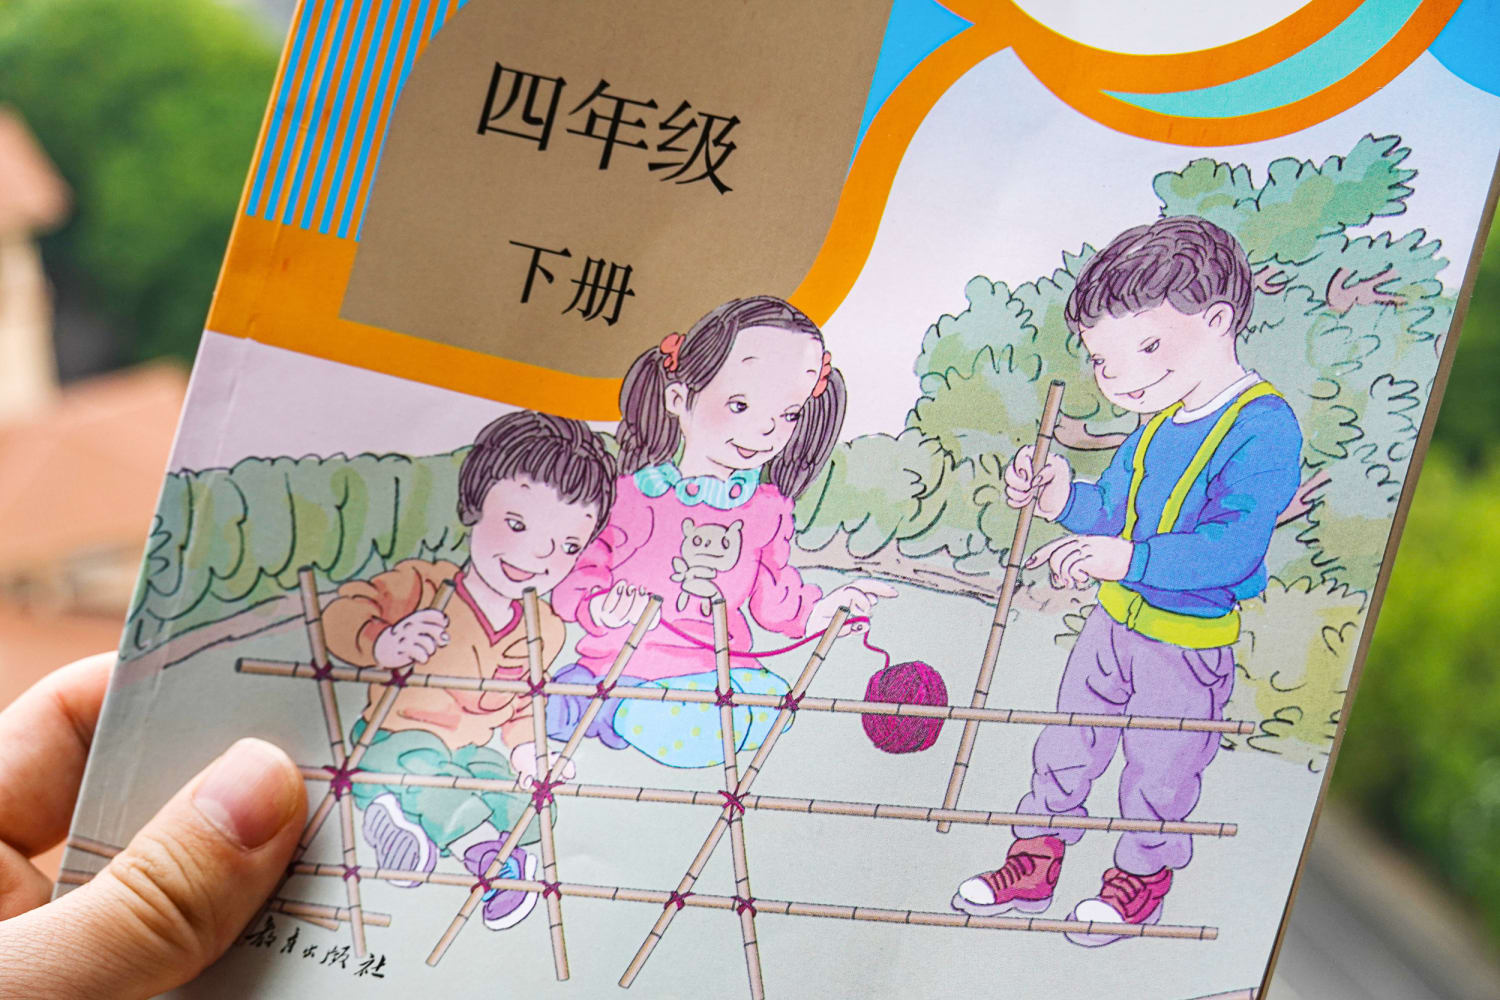 Uproar in China over textbook images 'not suitable for children'